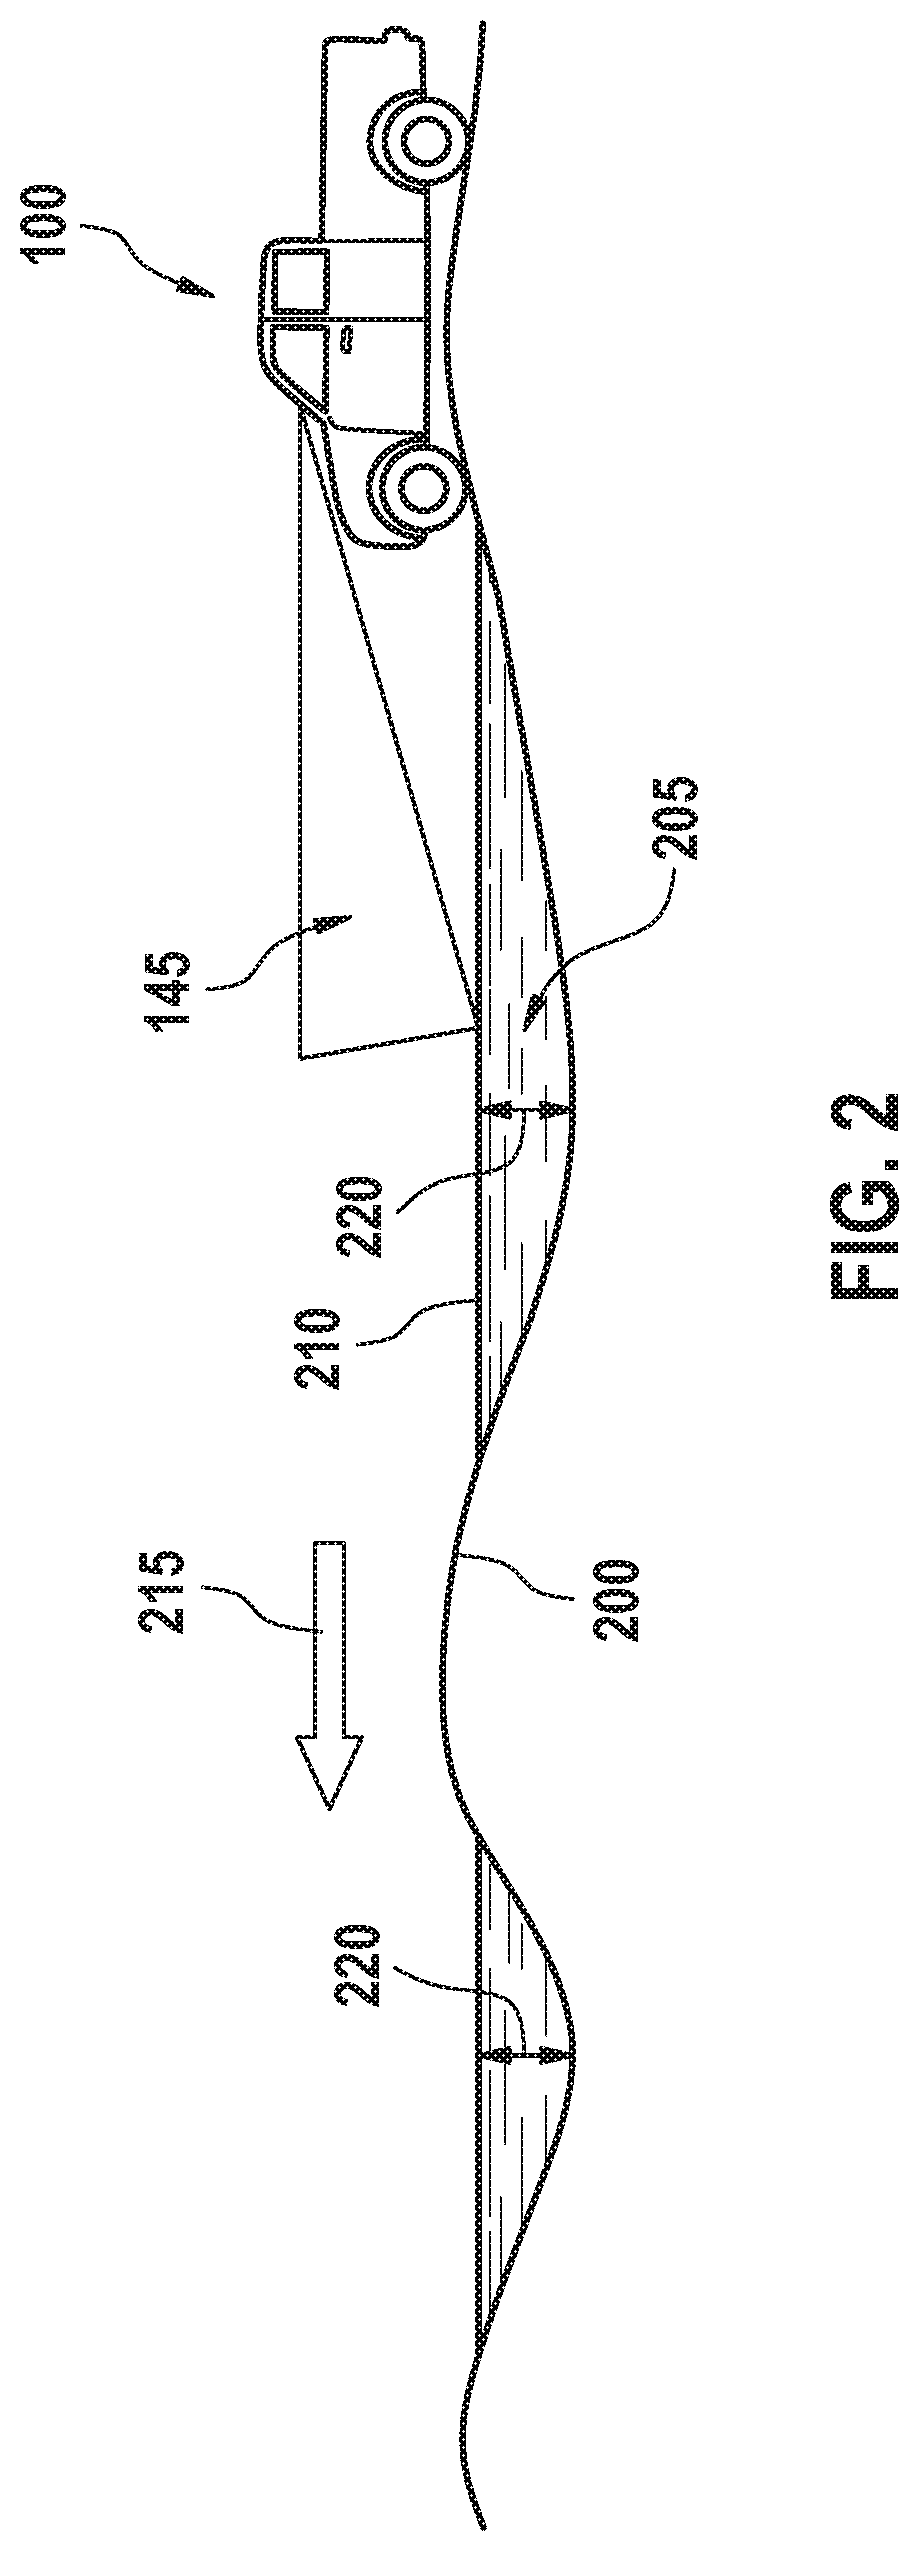 Method for ascertaining a liquid depth of a liquid accumulation on a travel path in front of a vehicle, and method for ascertaining a travel trajectory through a liquid accumulation on a travel path in front of a vehicle